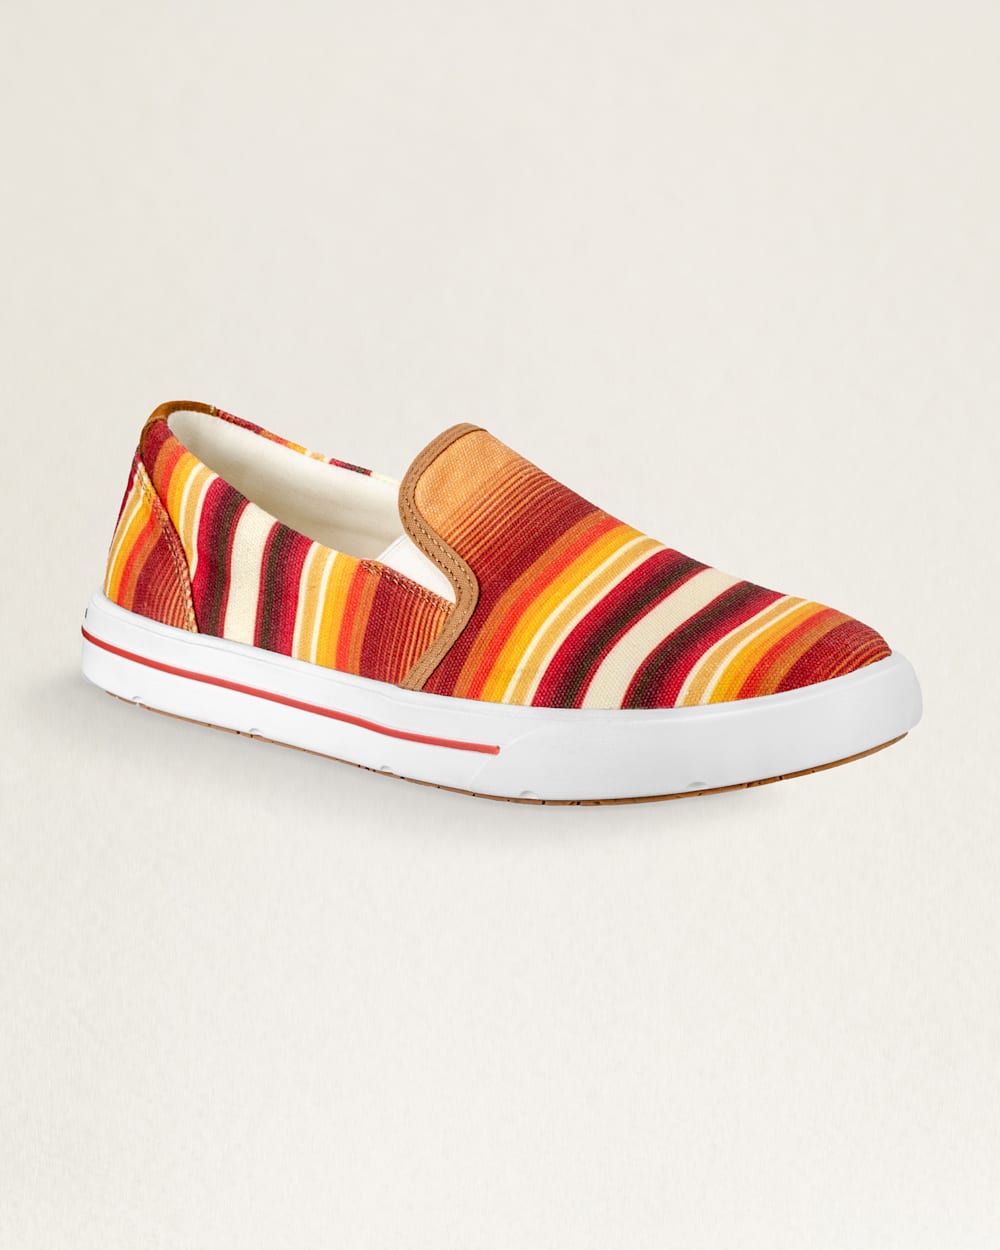 WOMEN'S SLIP-ON SHOES IN RALSTON MULTI STRIPE image number 1